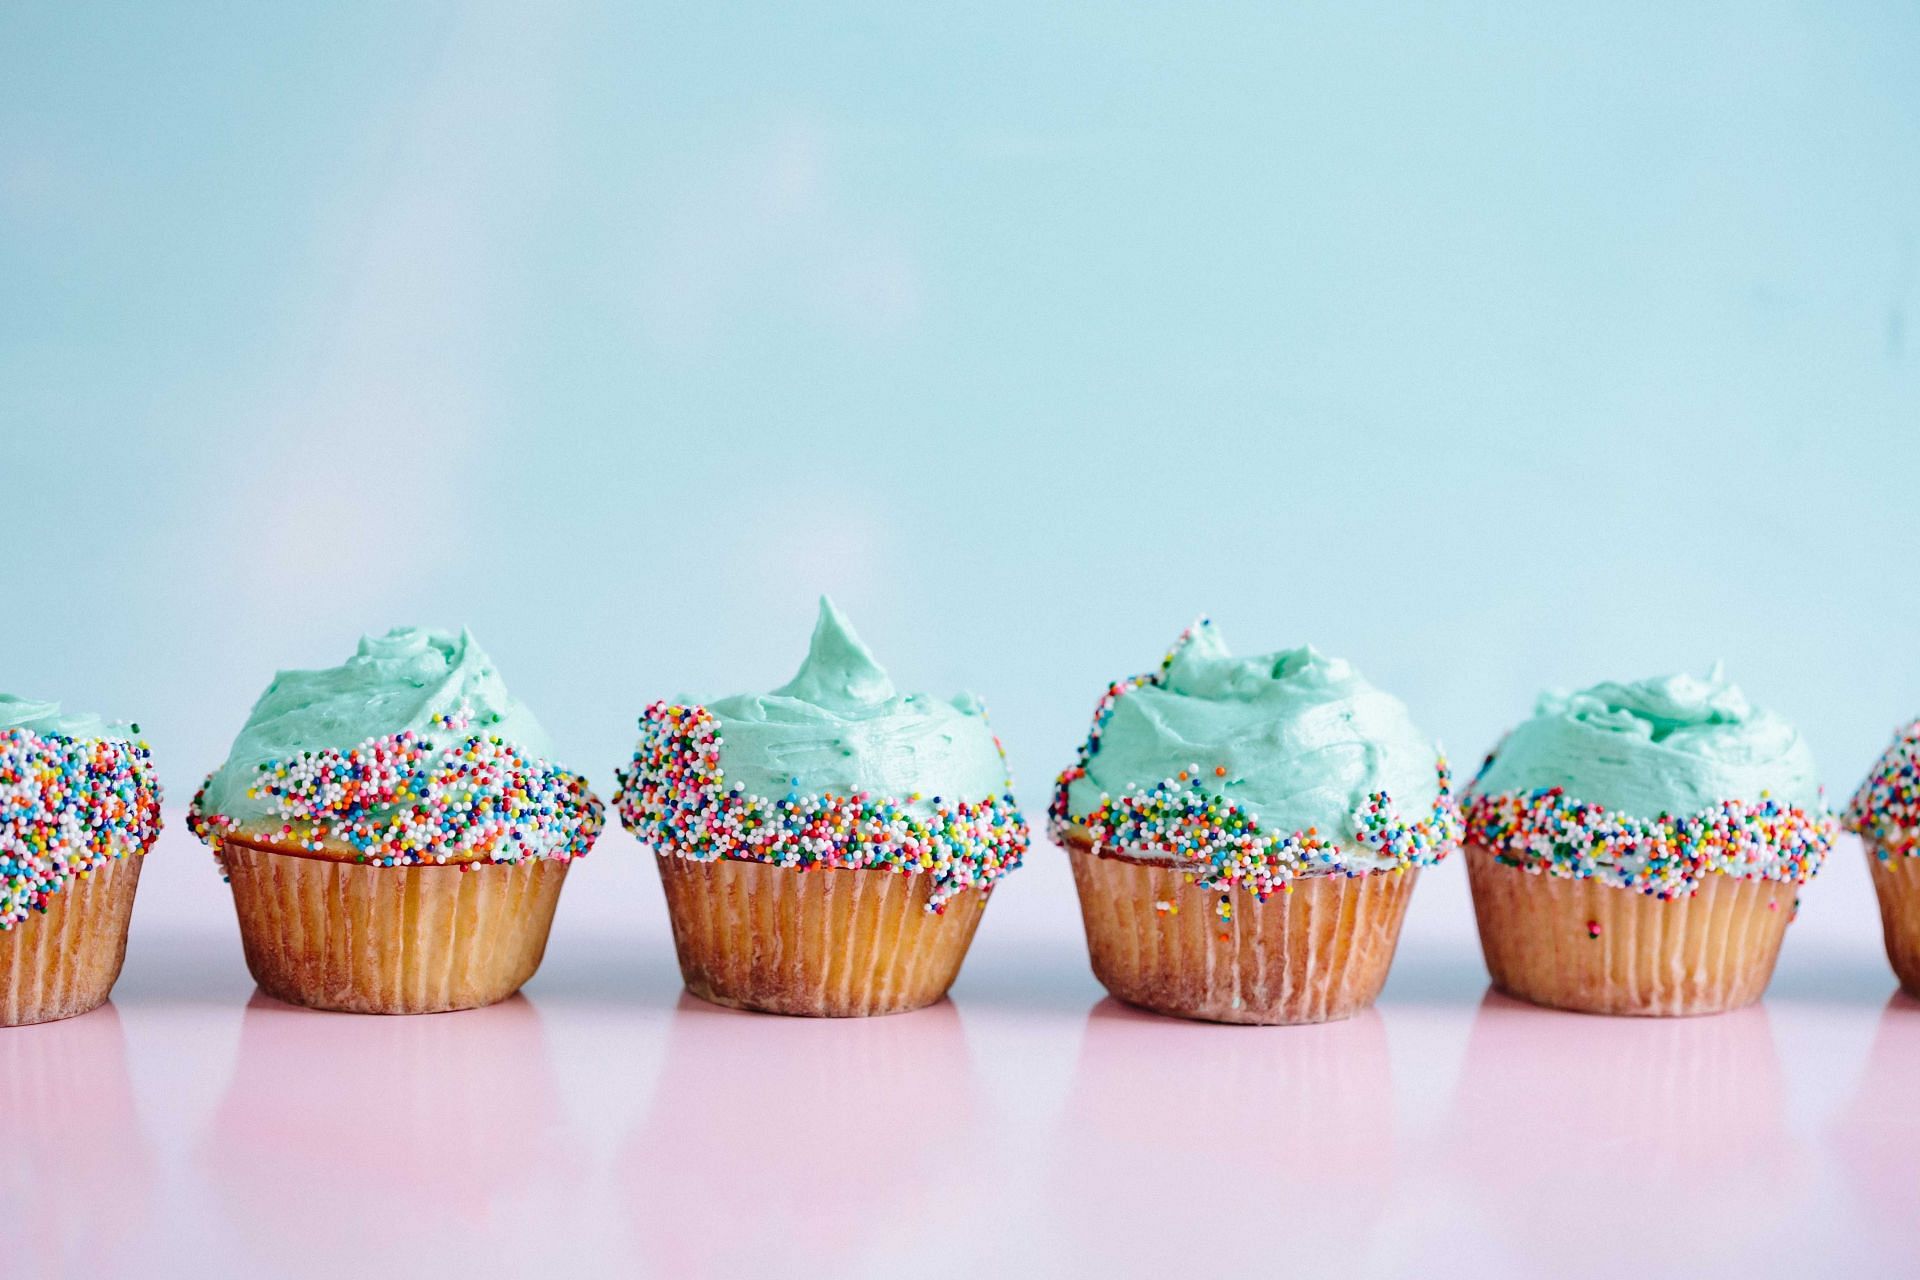 Sugary foods must be consumed in moderation. (Image via Unsplash/ Brooke Lark)